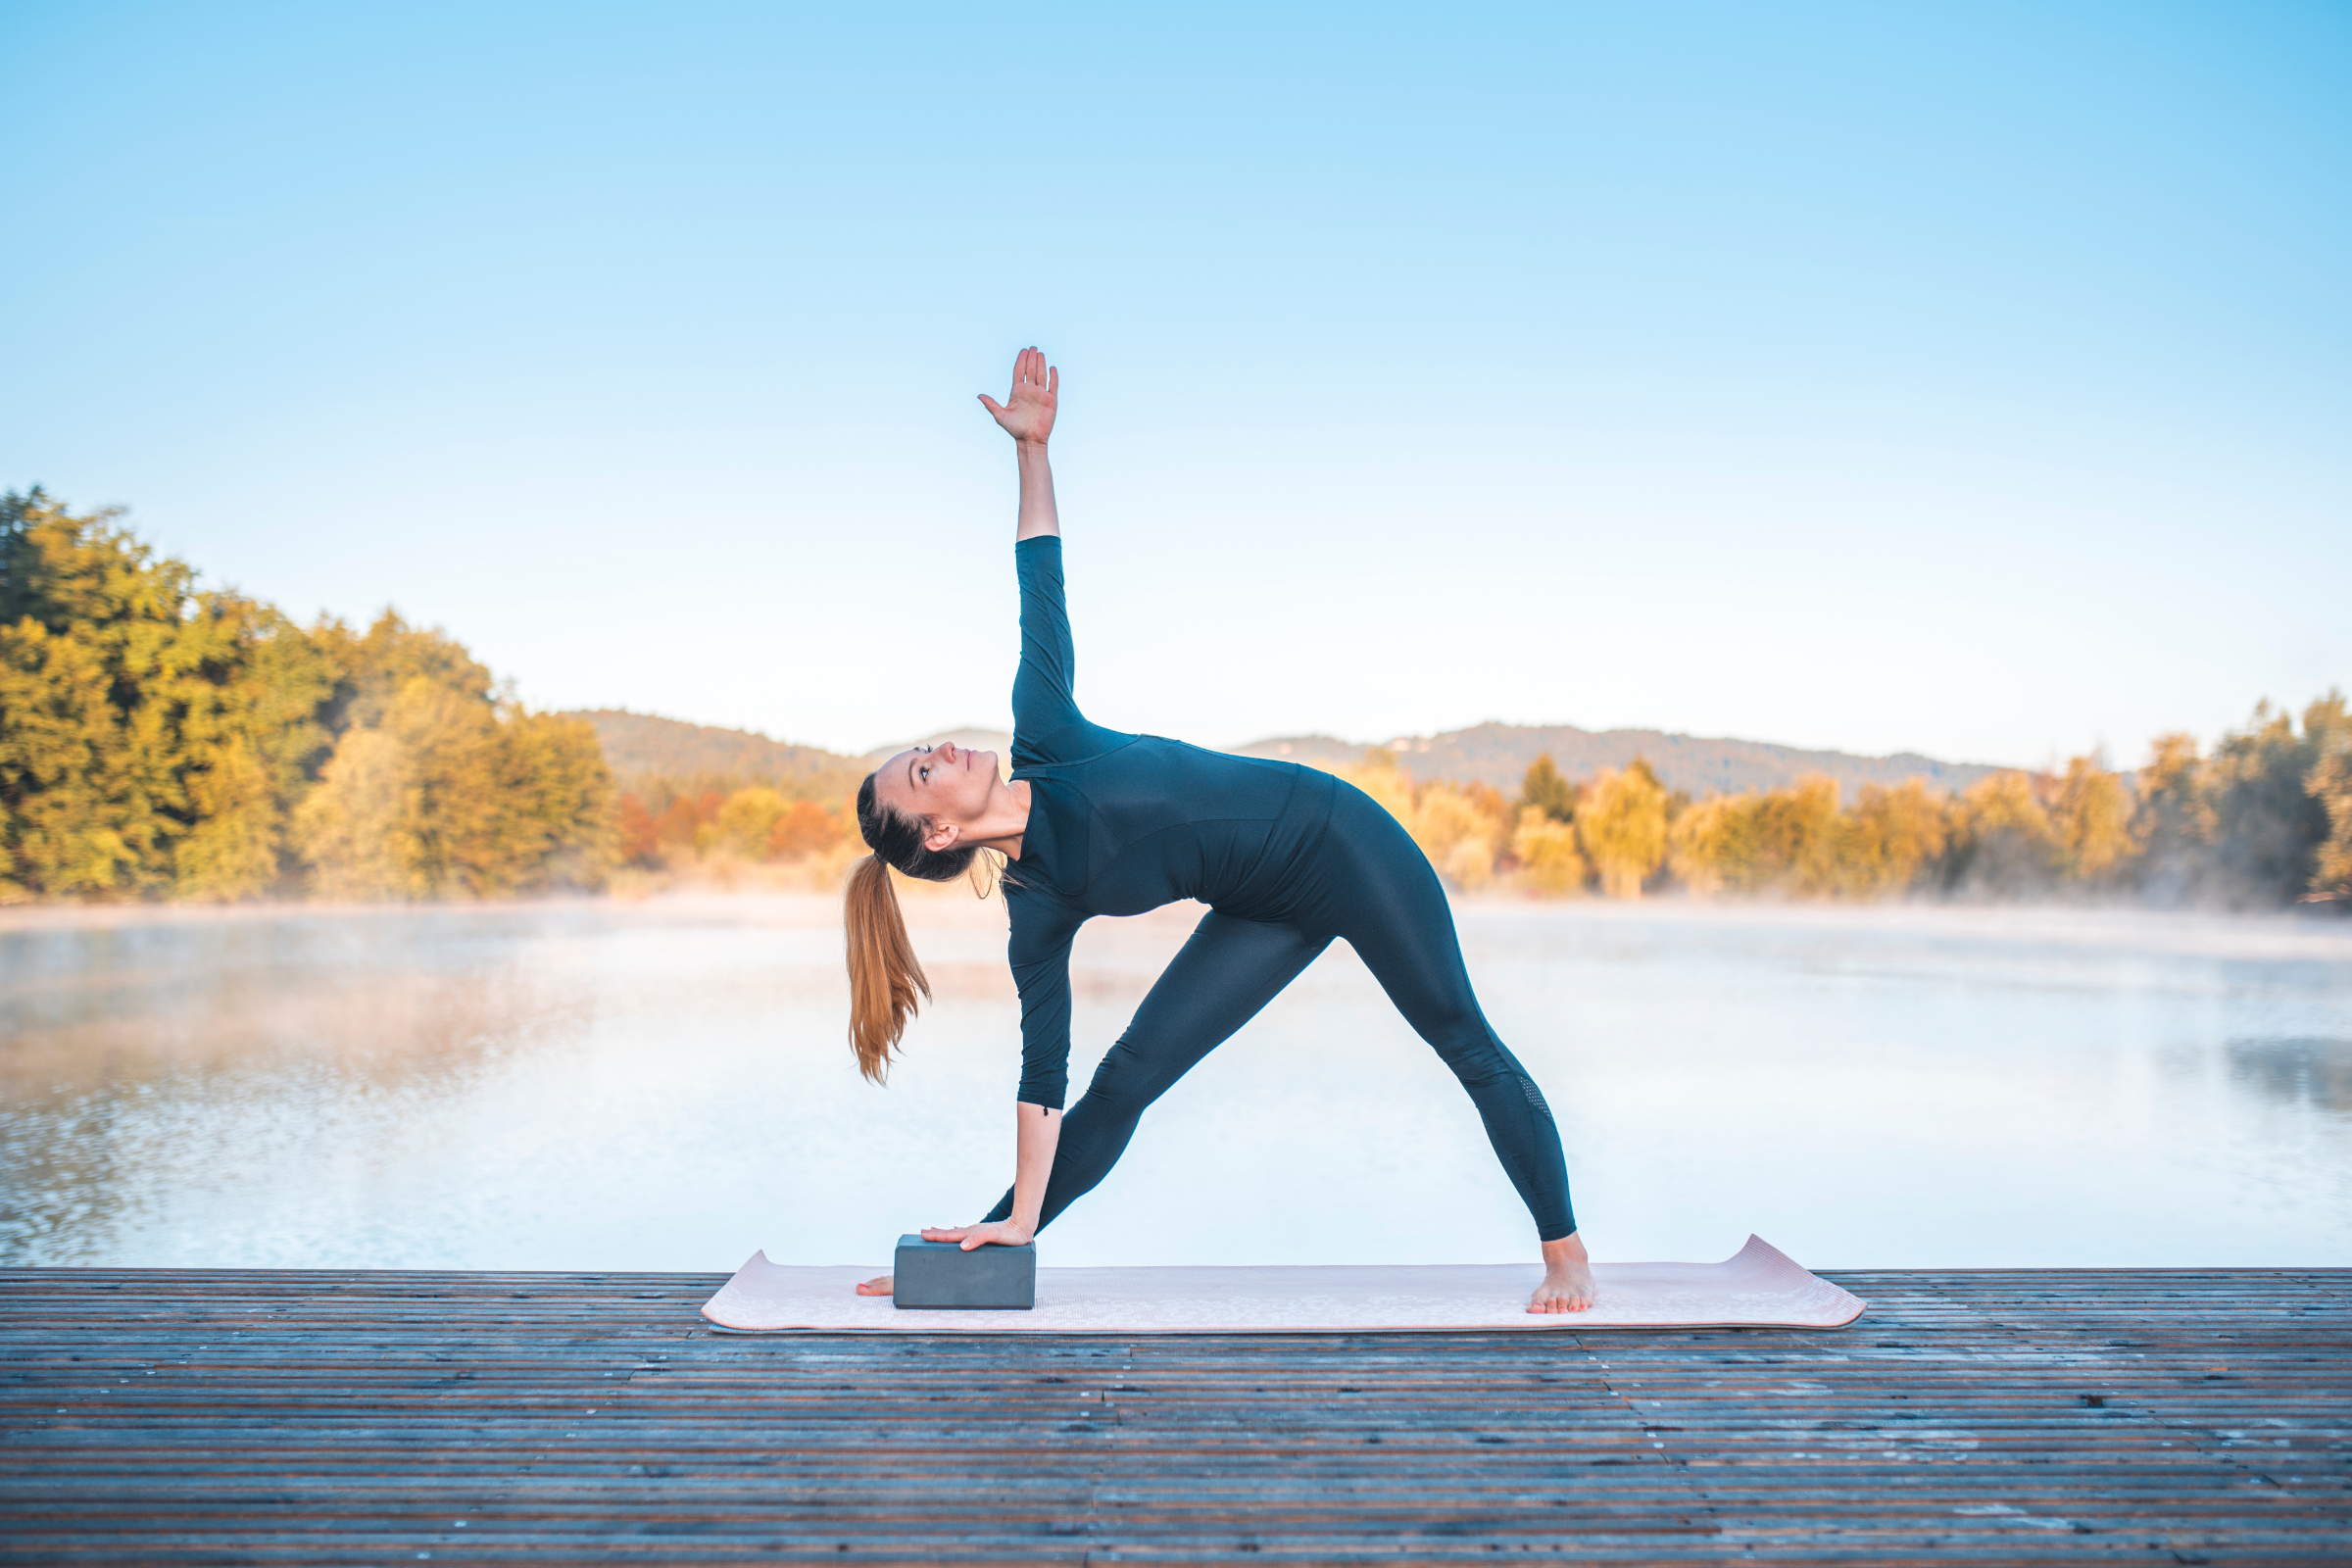 blonde woman with ponytail wearing all black on a wooden dock by water doing triangle yoga pose